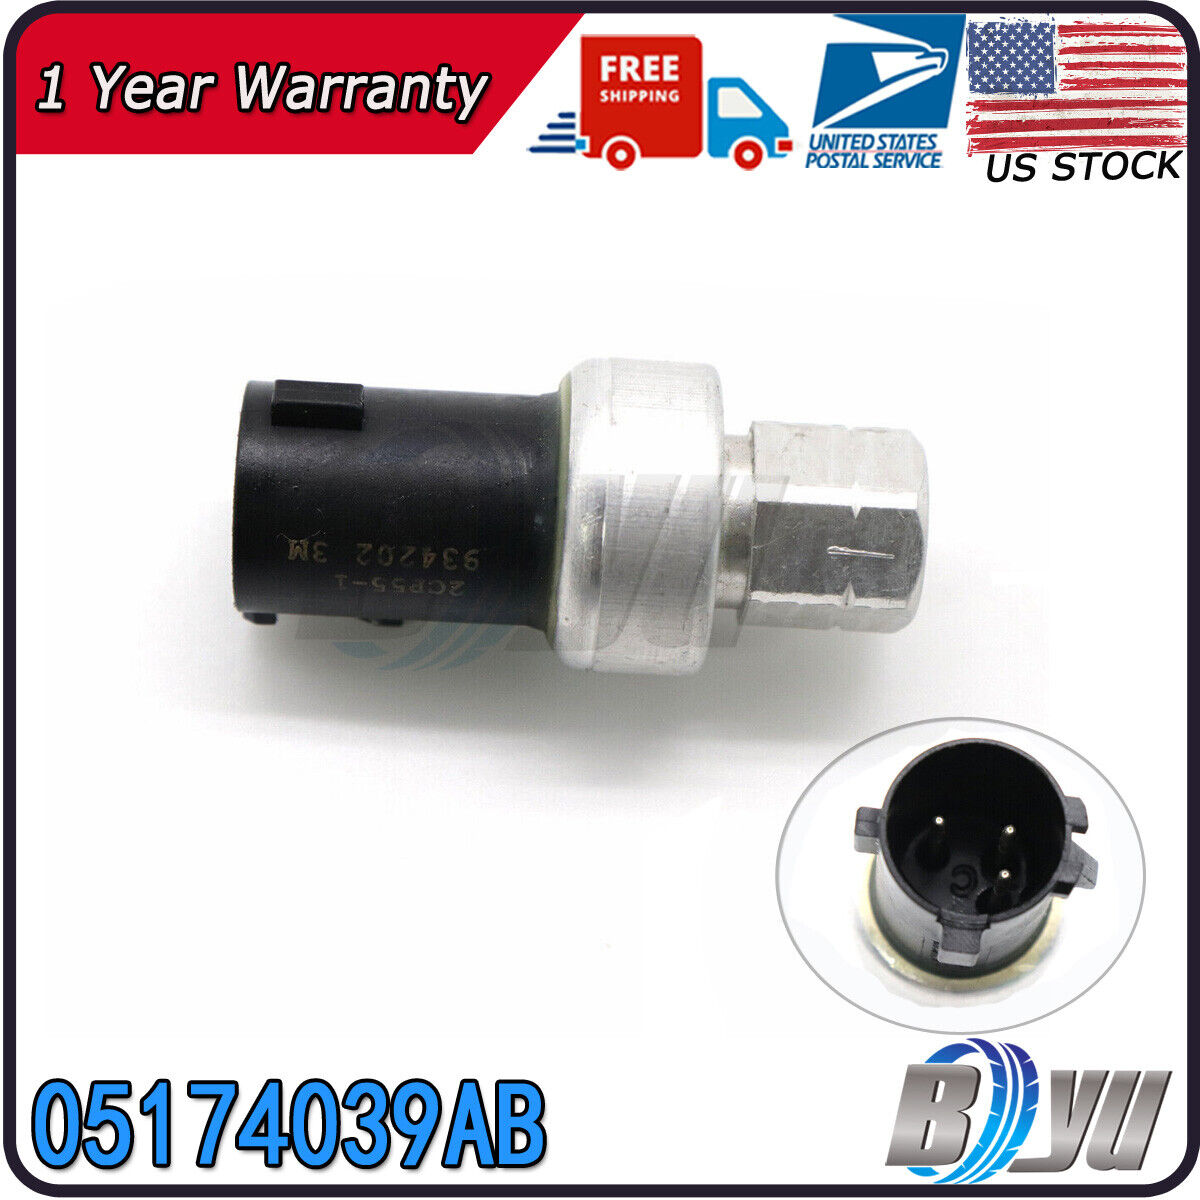 05174039AB For Jeep Chrysler Dodge Plymouth Ram Pressure Transducer A/C Switch